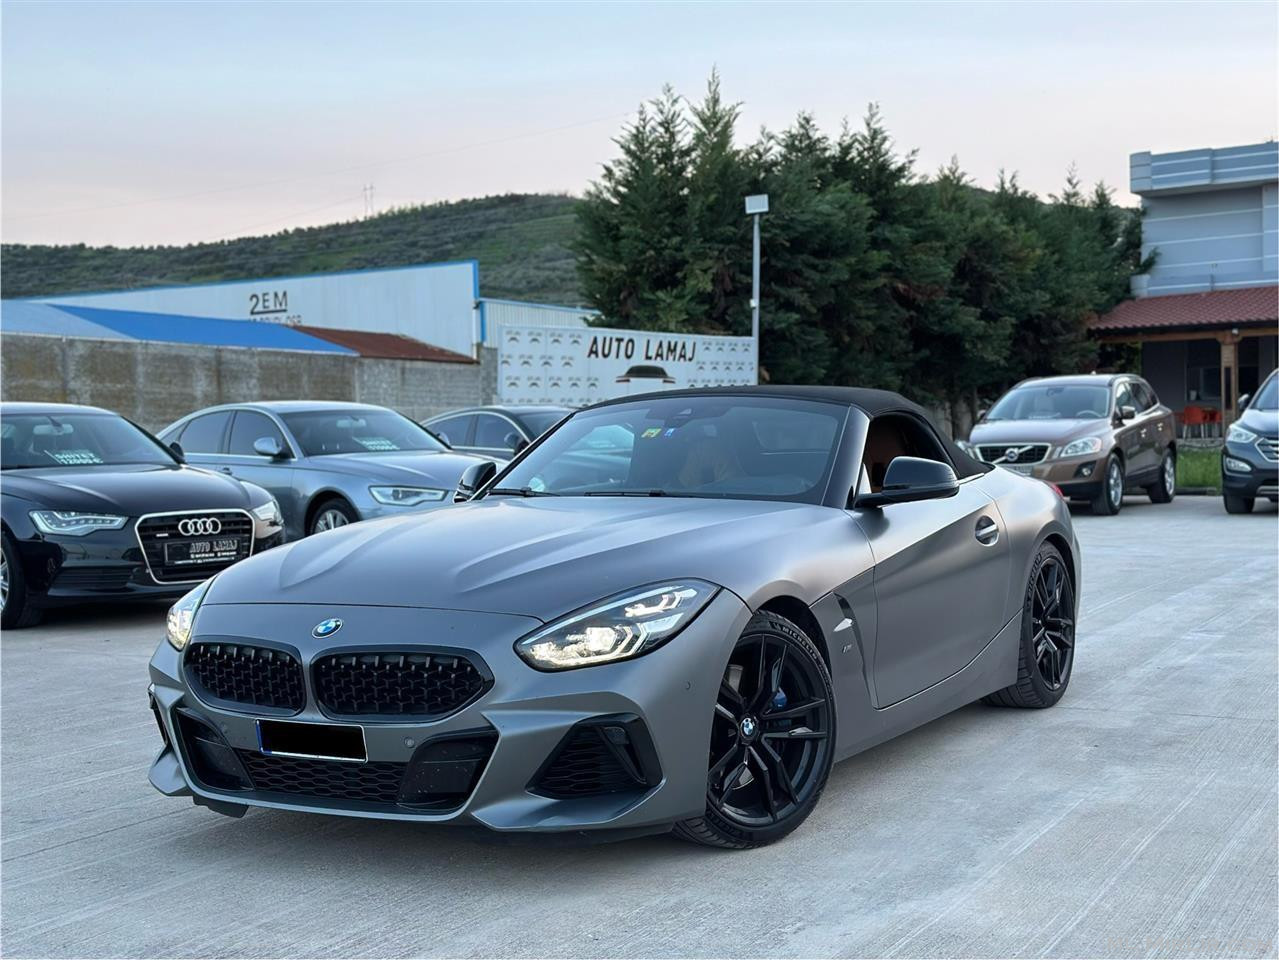 BMW Z4 M competition